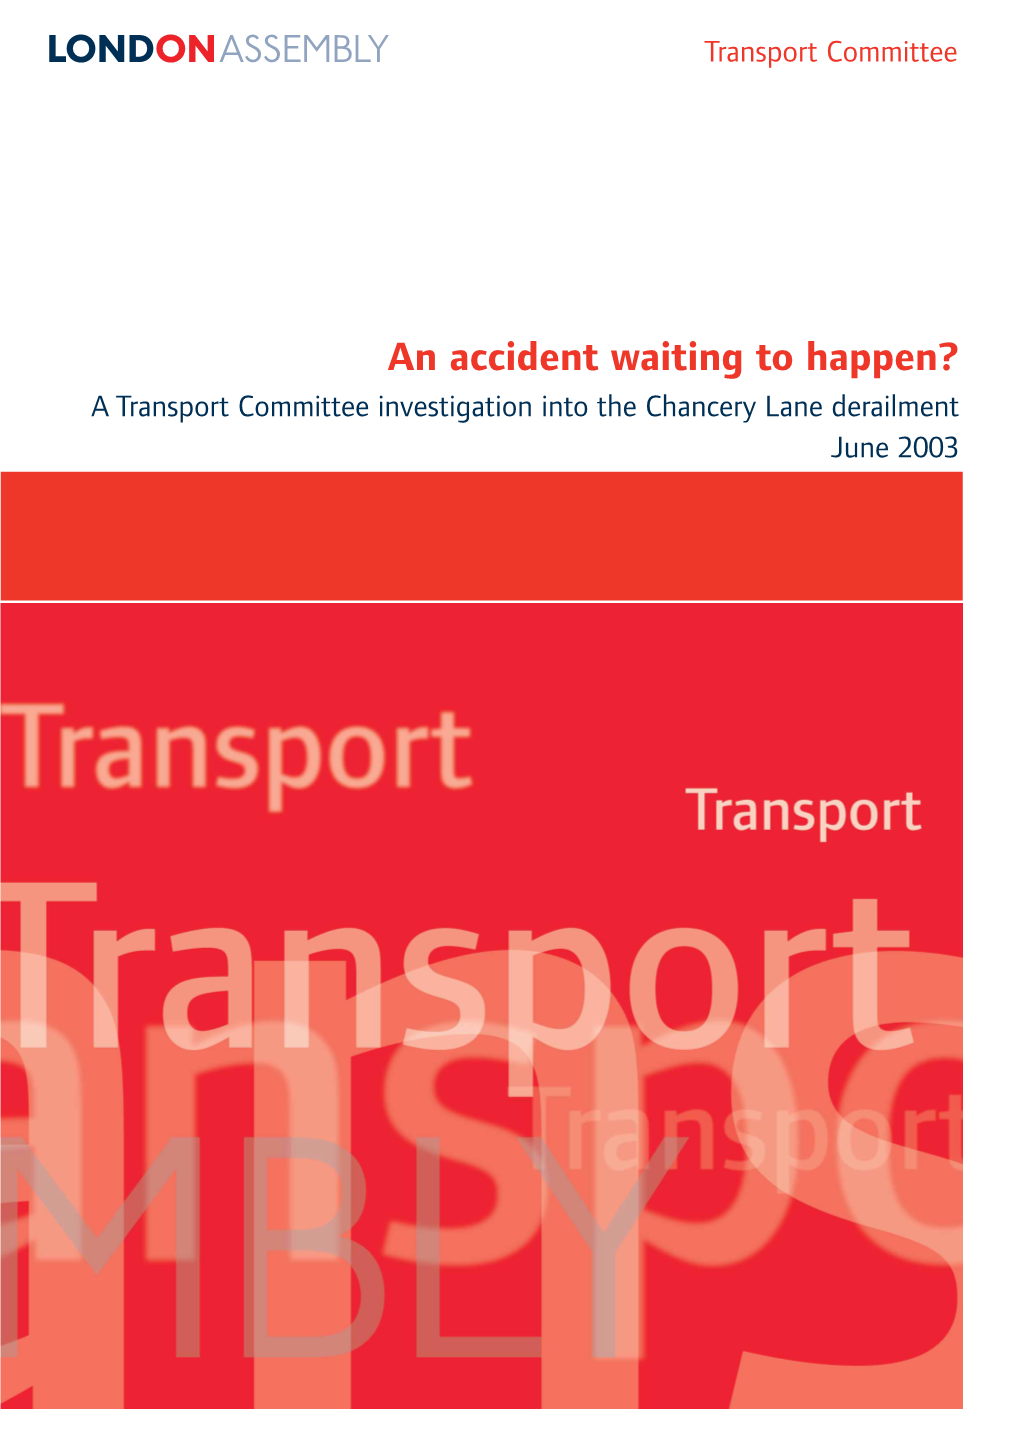 1 the Chancery Lane Derailment – a London Assembly Transport Committee Investigation